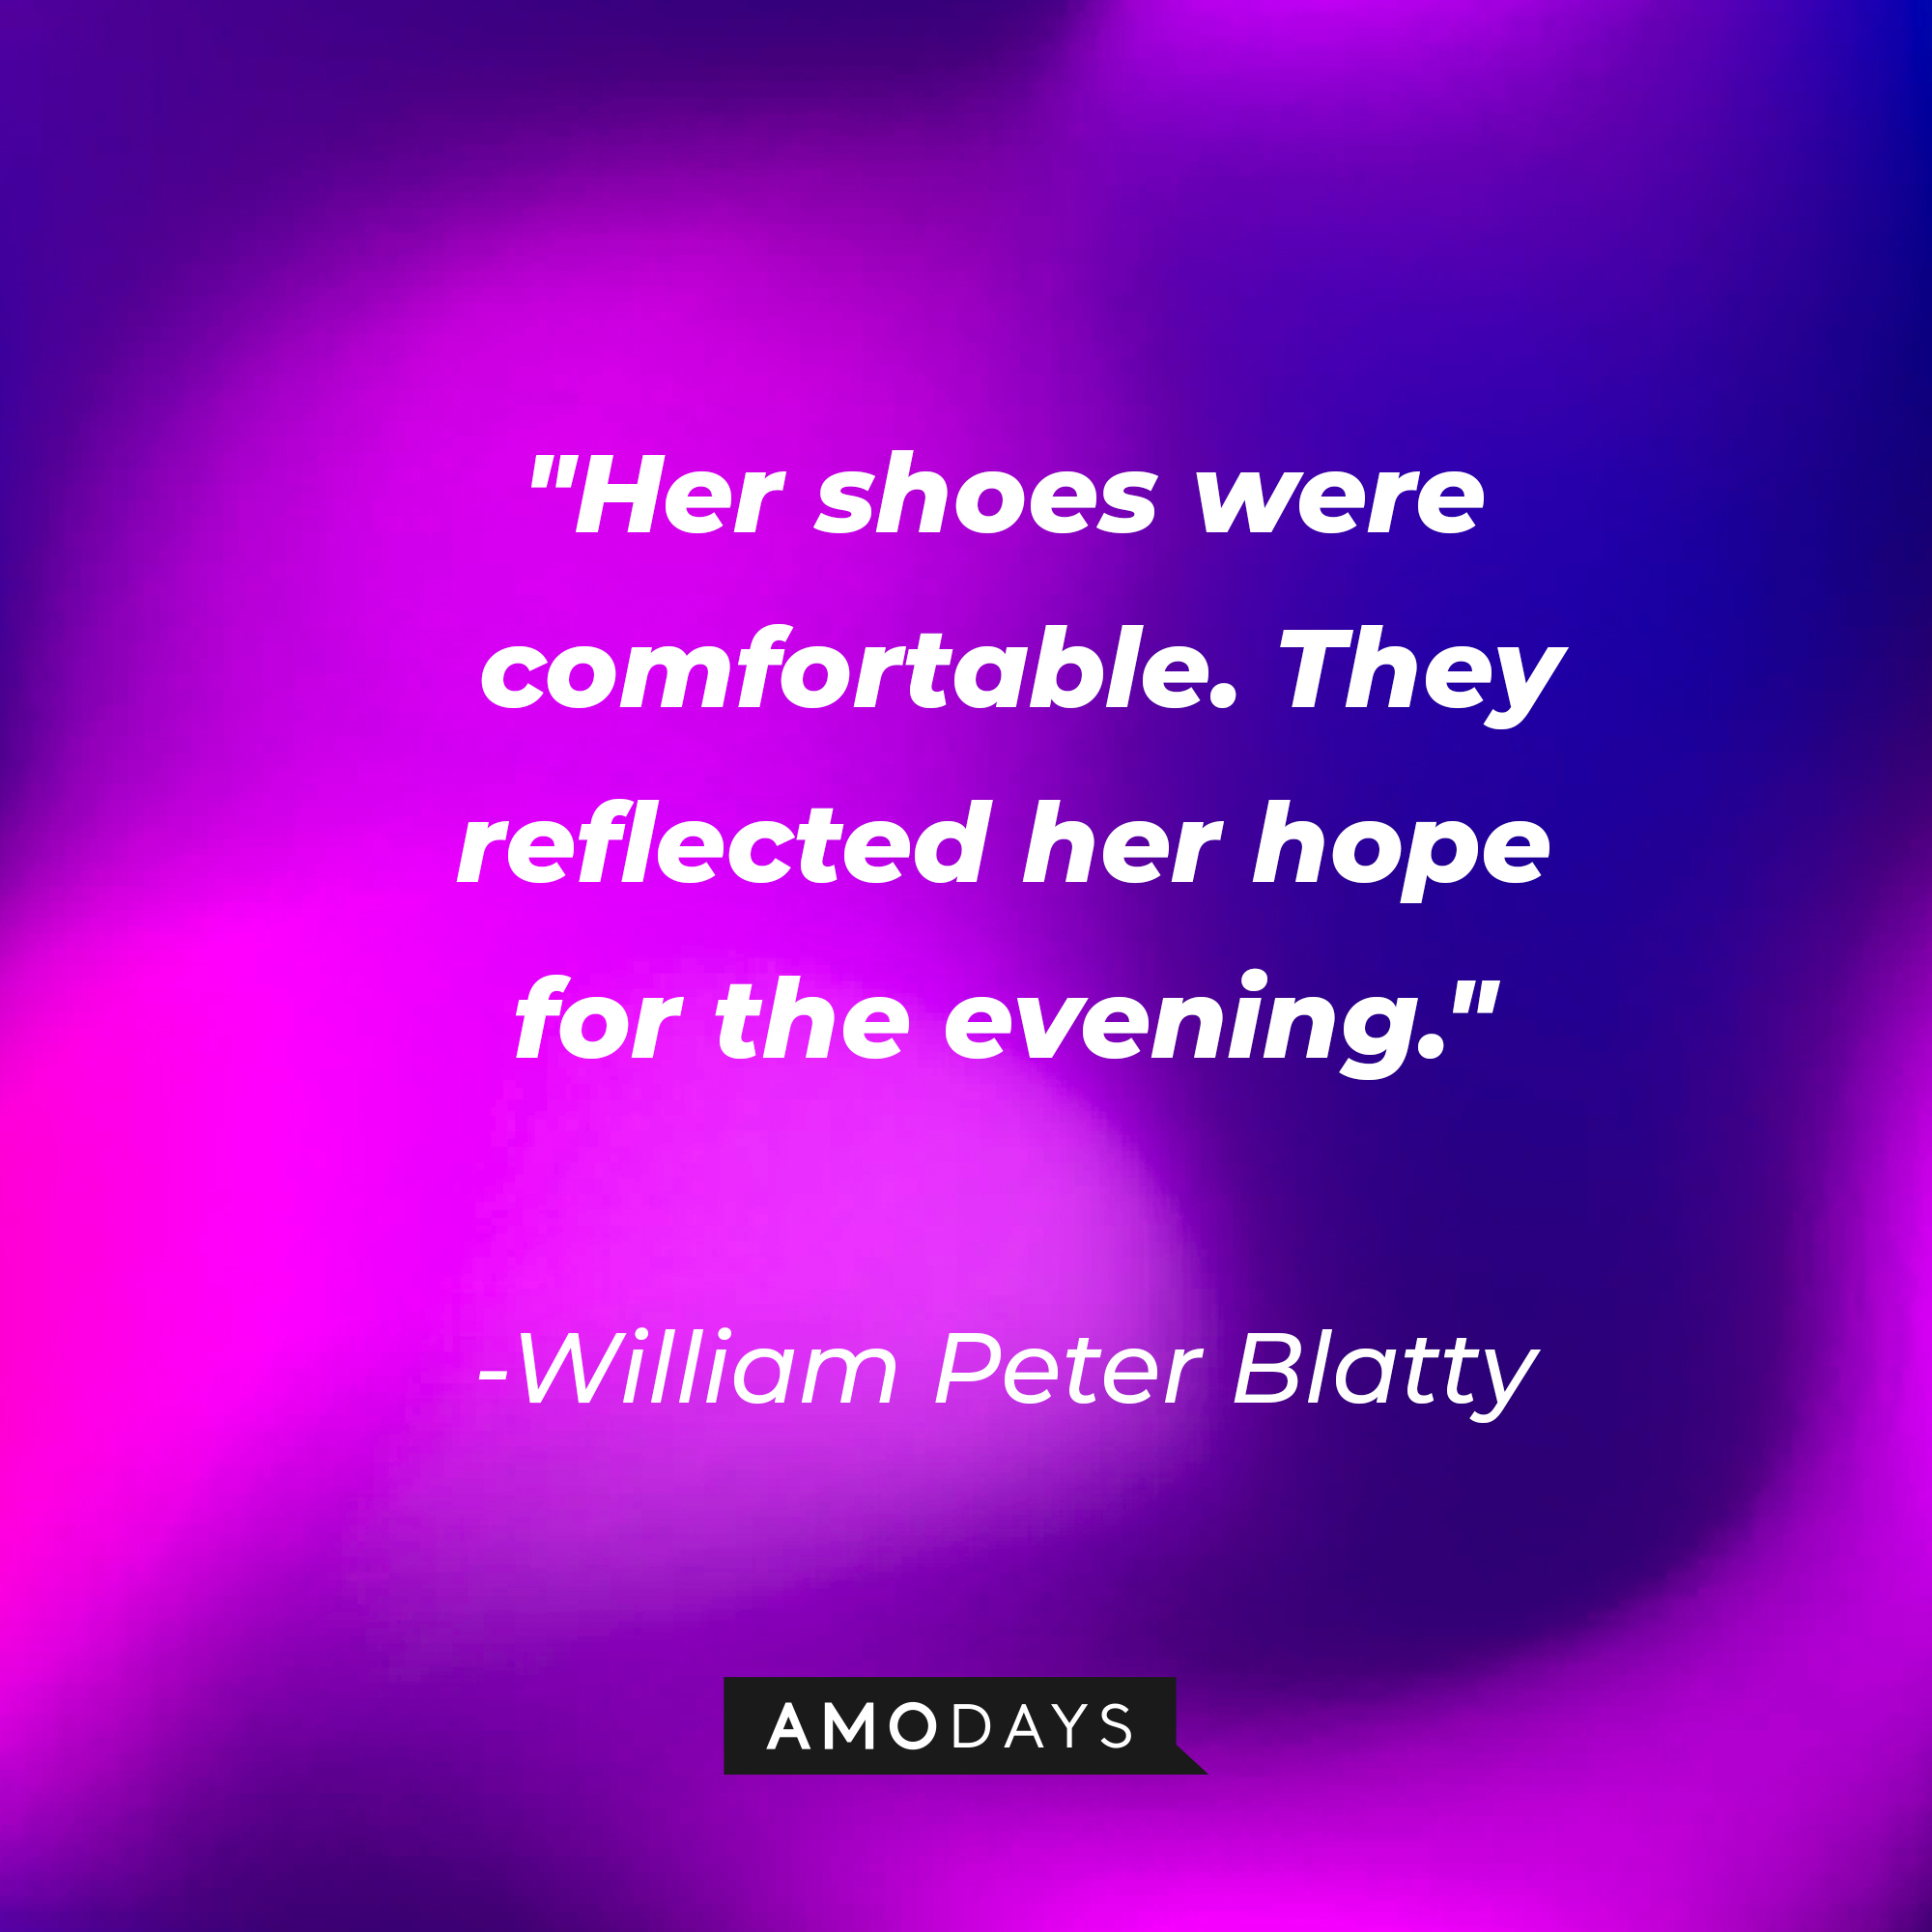 William Peter Blatty's quote: "Her shoes were comfortable. They reflected her hope for the evening." | Source: AmoDays